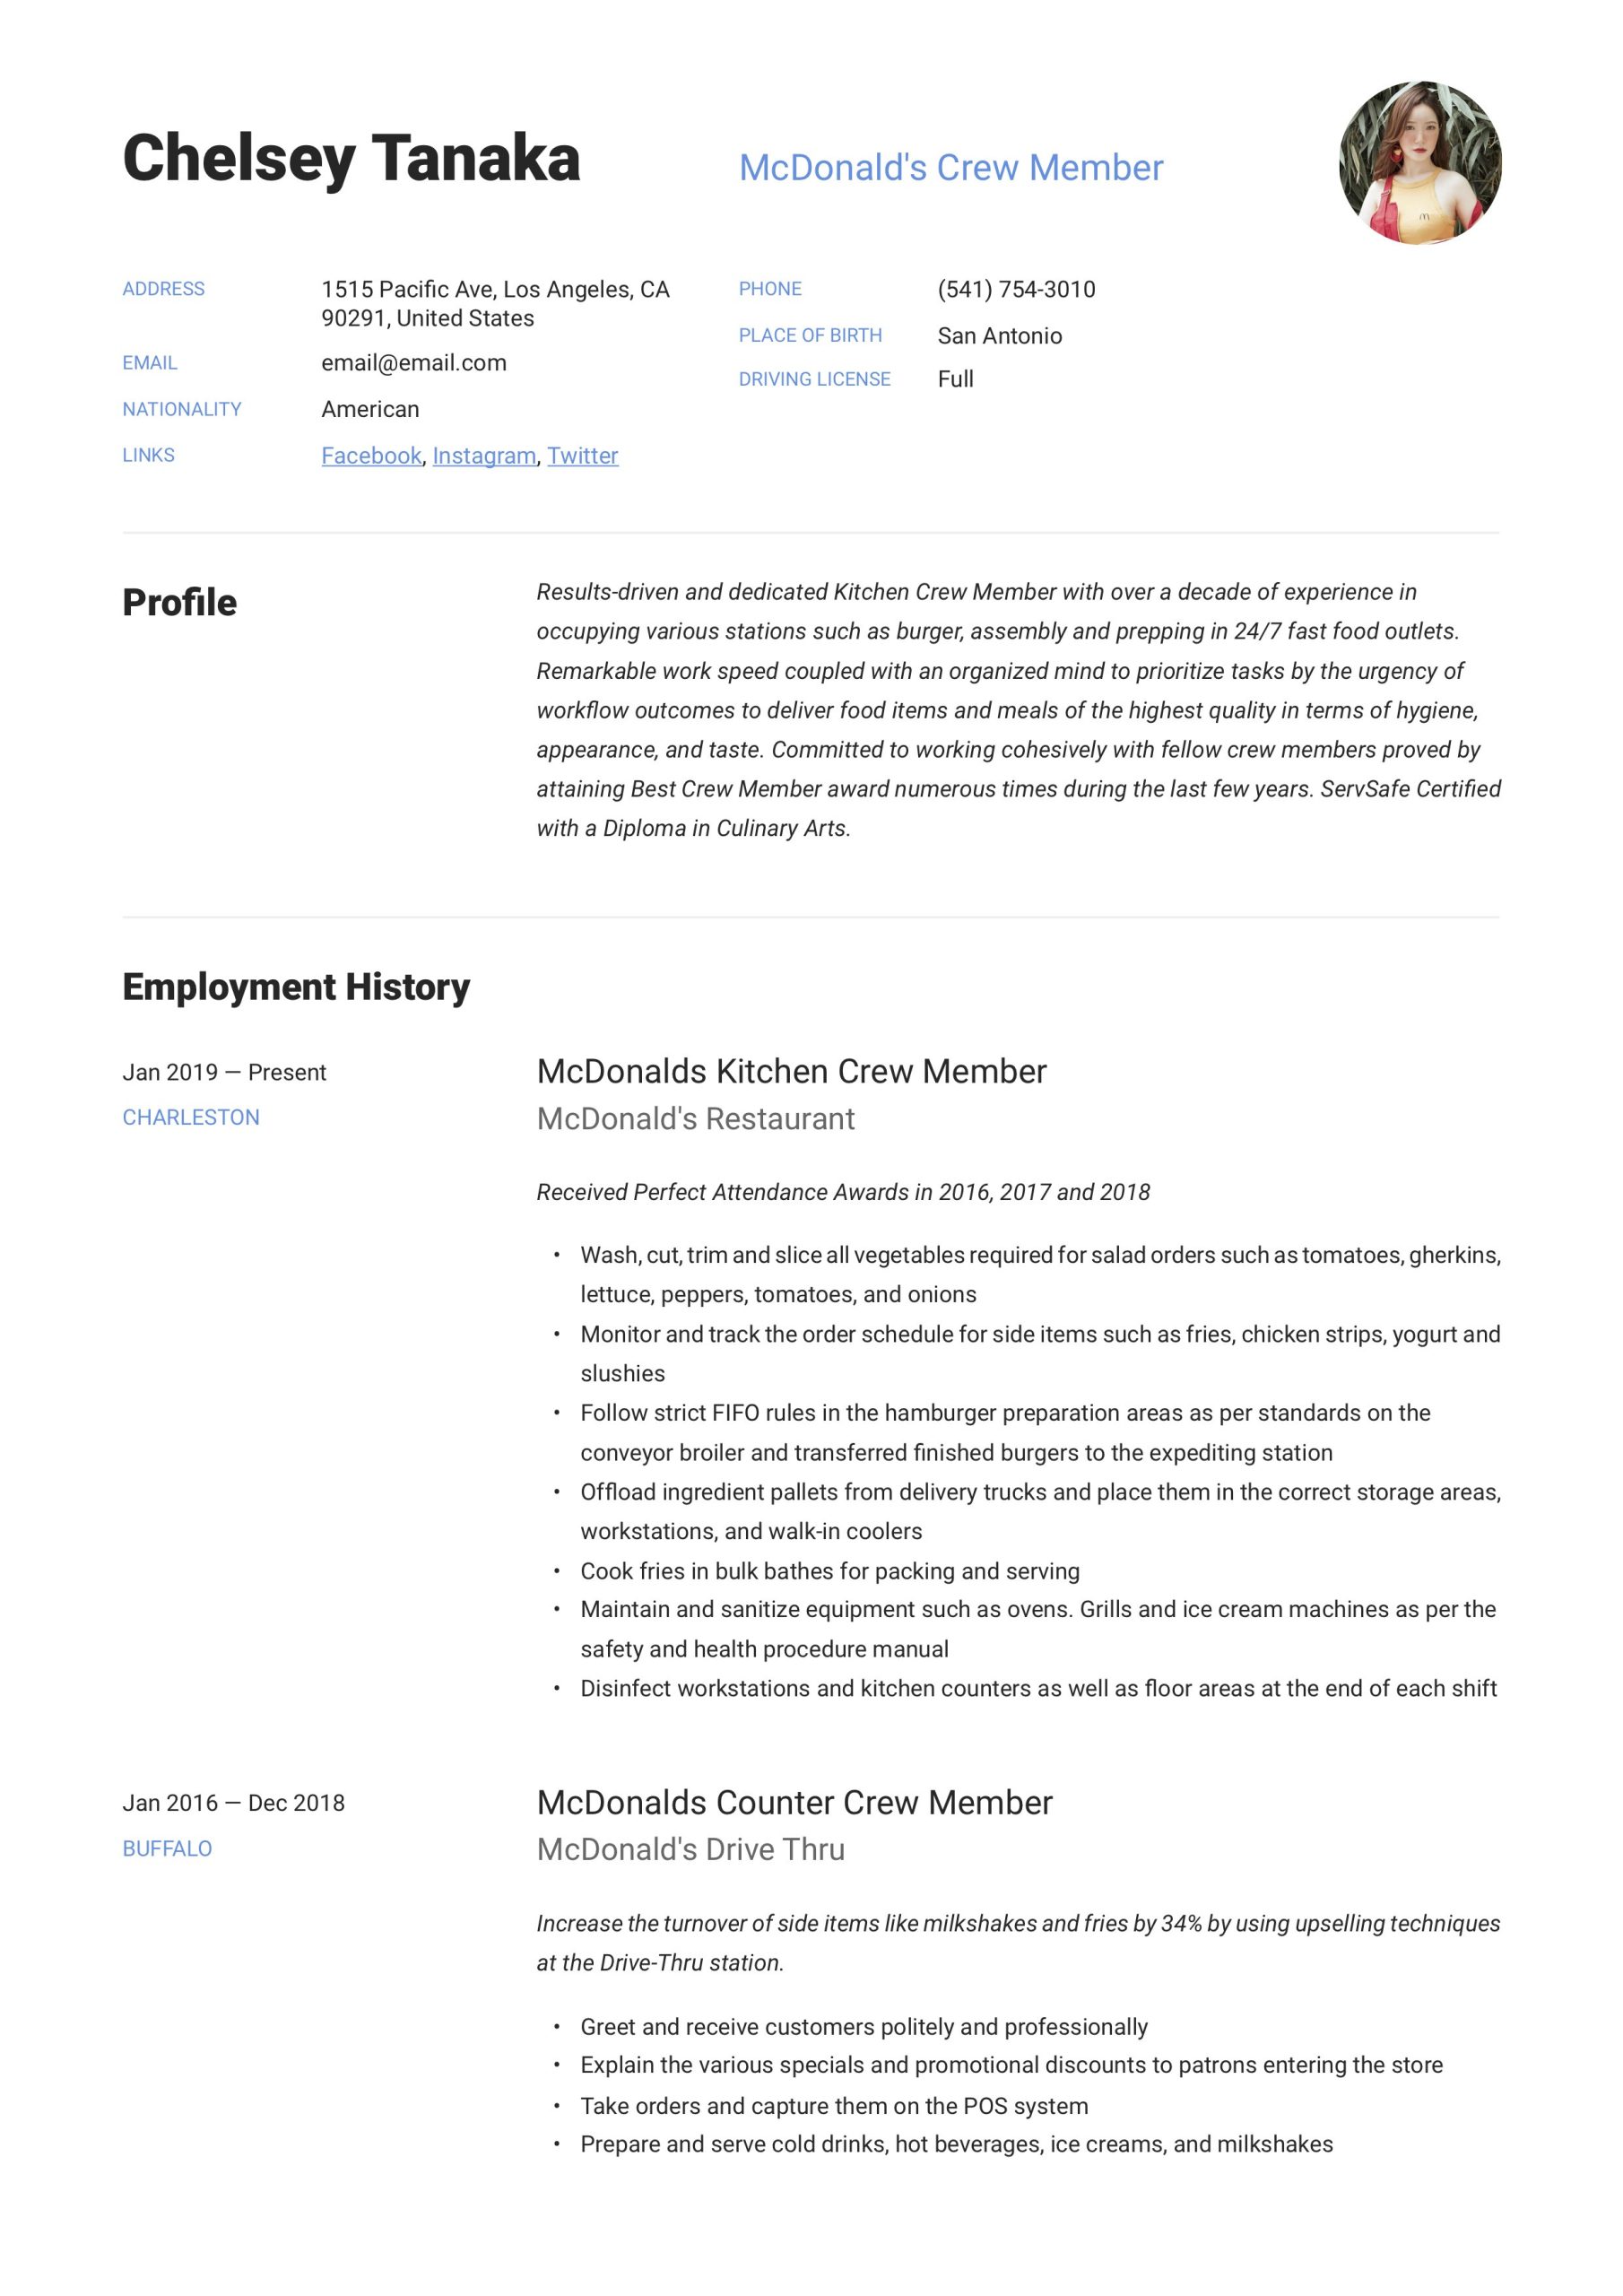 Resume Sample From A Preson Working In Mcdonalds Mcdonalds Crew Member Resume & Writing Guide  12 Examples 2020